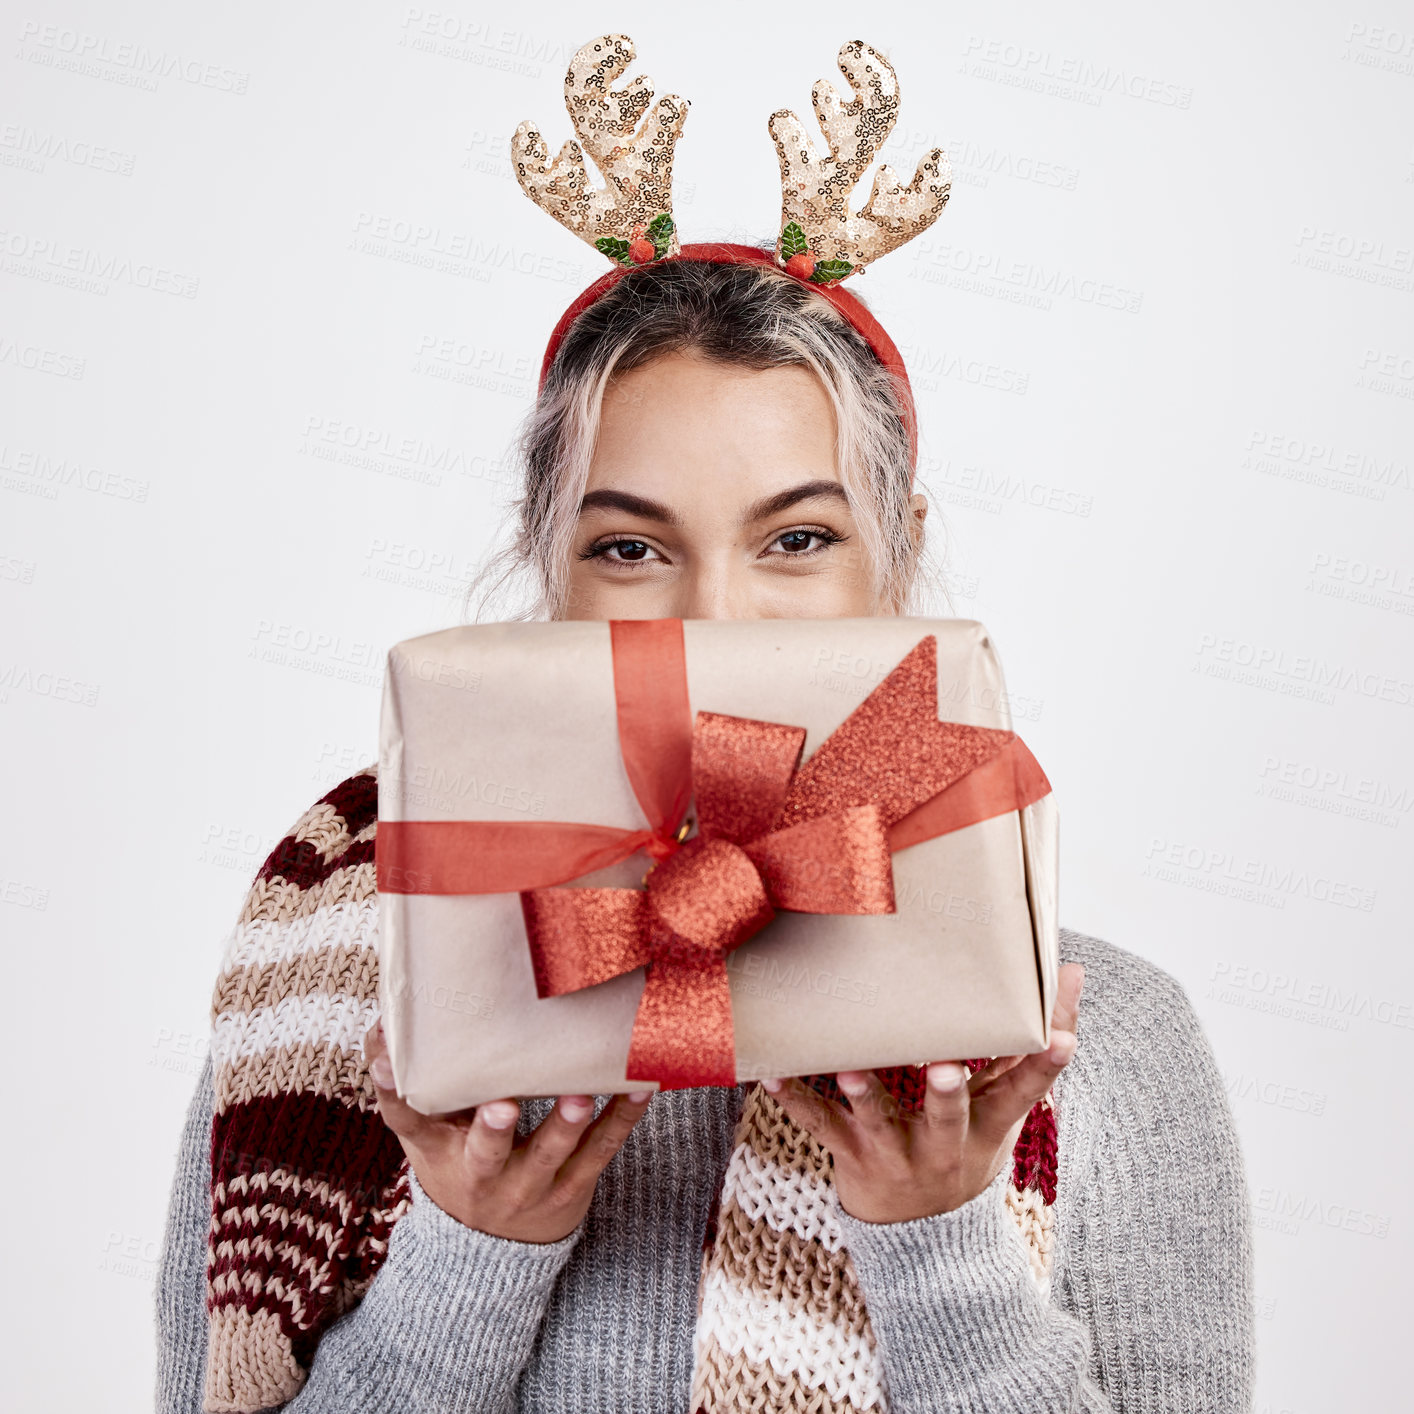 Buy stock photo Studio portrait of an attractive young woman holding a present up in front of her face while dressed in Christmas-themed attire